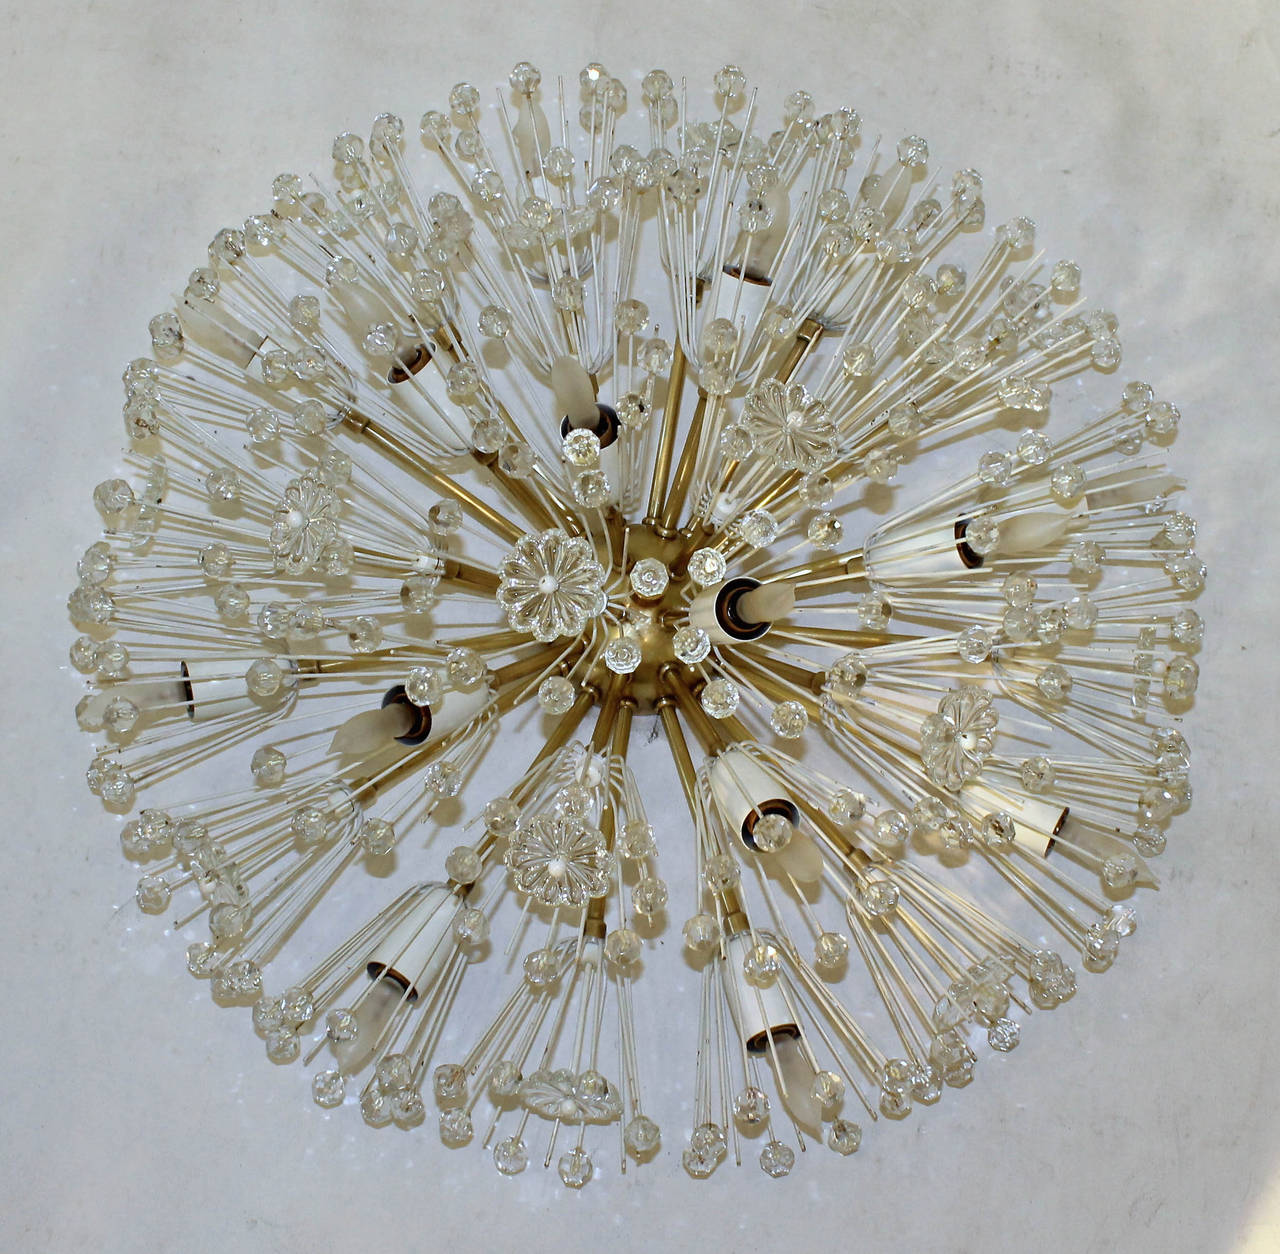 Fantastic large Emil Stejnar snowball flush mount ceiling light constructed of brass with white painted florets and socket covers accented with crystal flowers and beads. Fifteen-light sockets use 25 watt max candelabra base bulbs.
Newly wired.